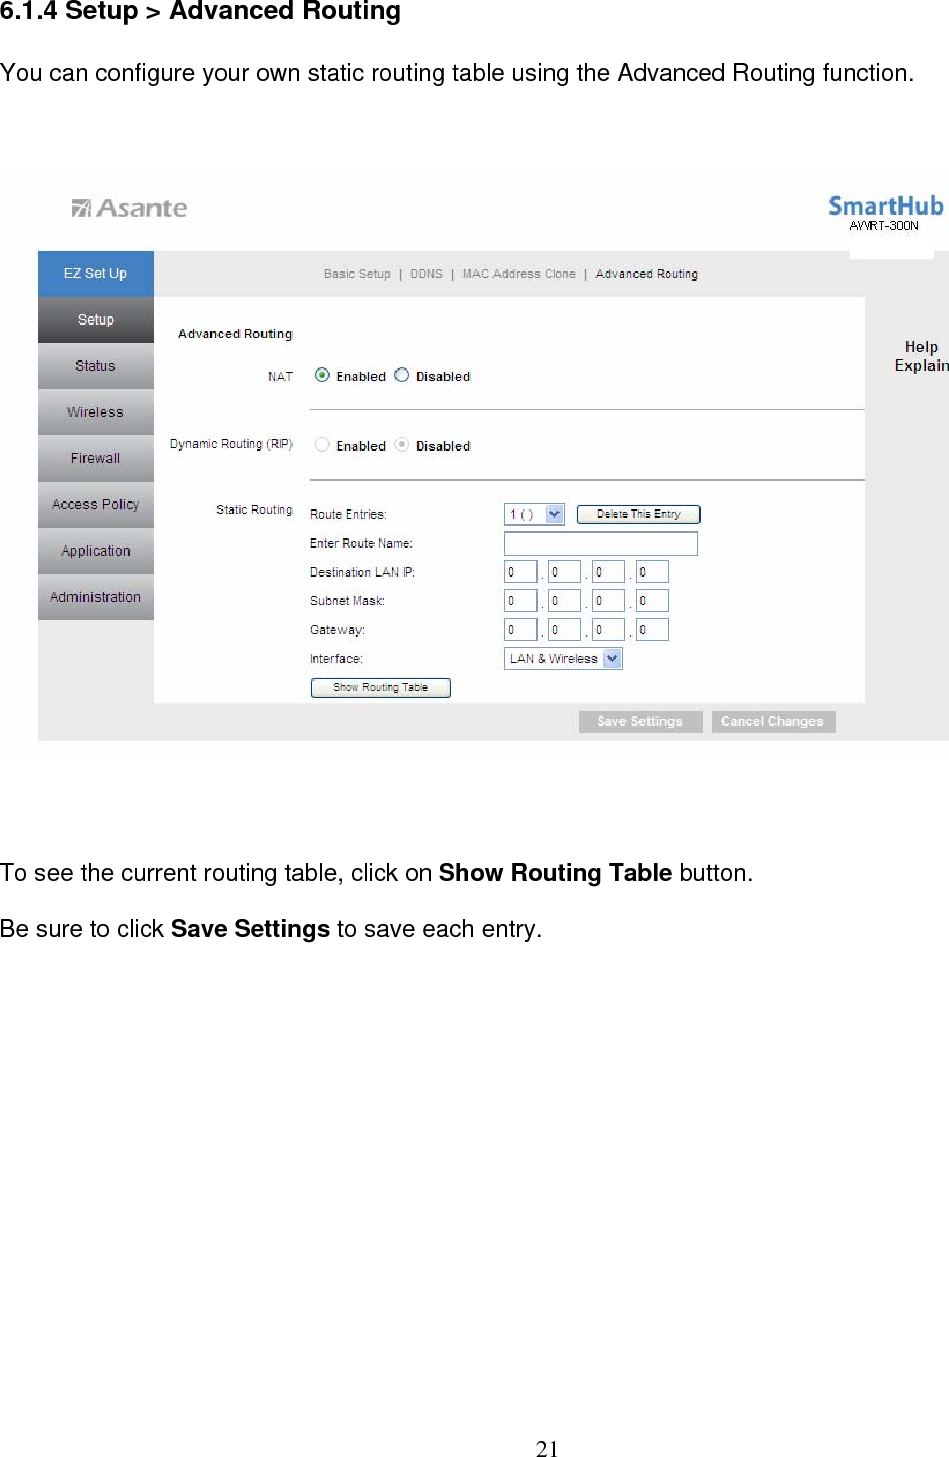  216.1.4 Setup &gt; Advanced Routing You can configure your own static routing table using the Advanced Routing function.  To see the current routing table, click on Show Routing Table button.  Be sure to click Save Settings to save each entry. 